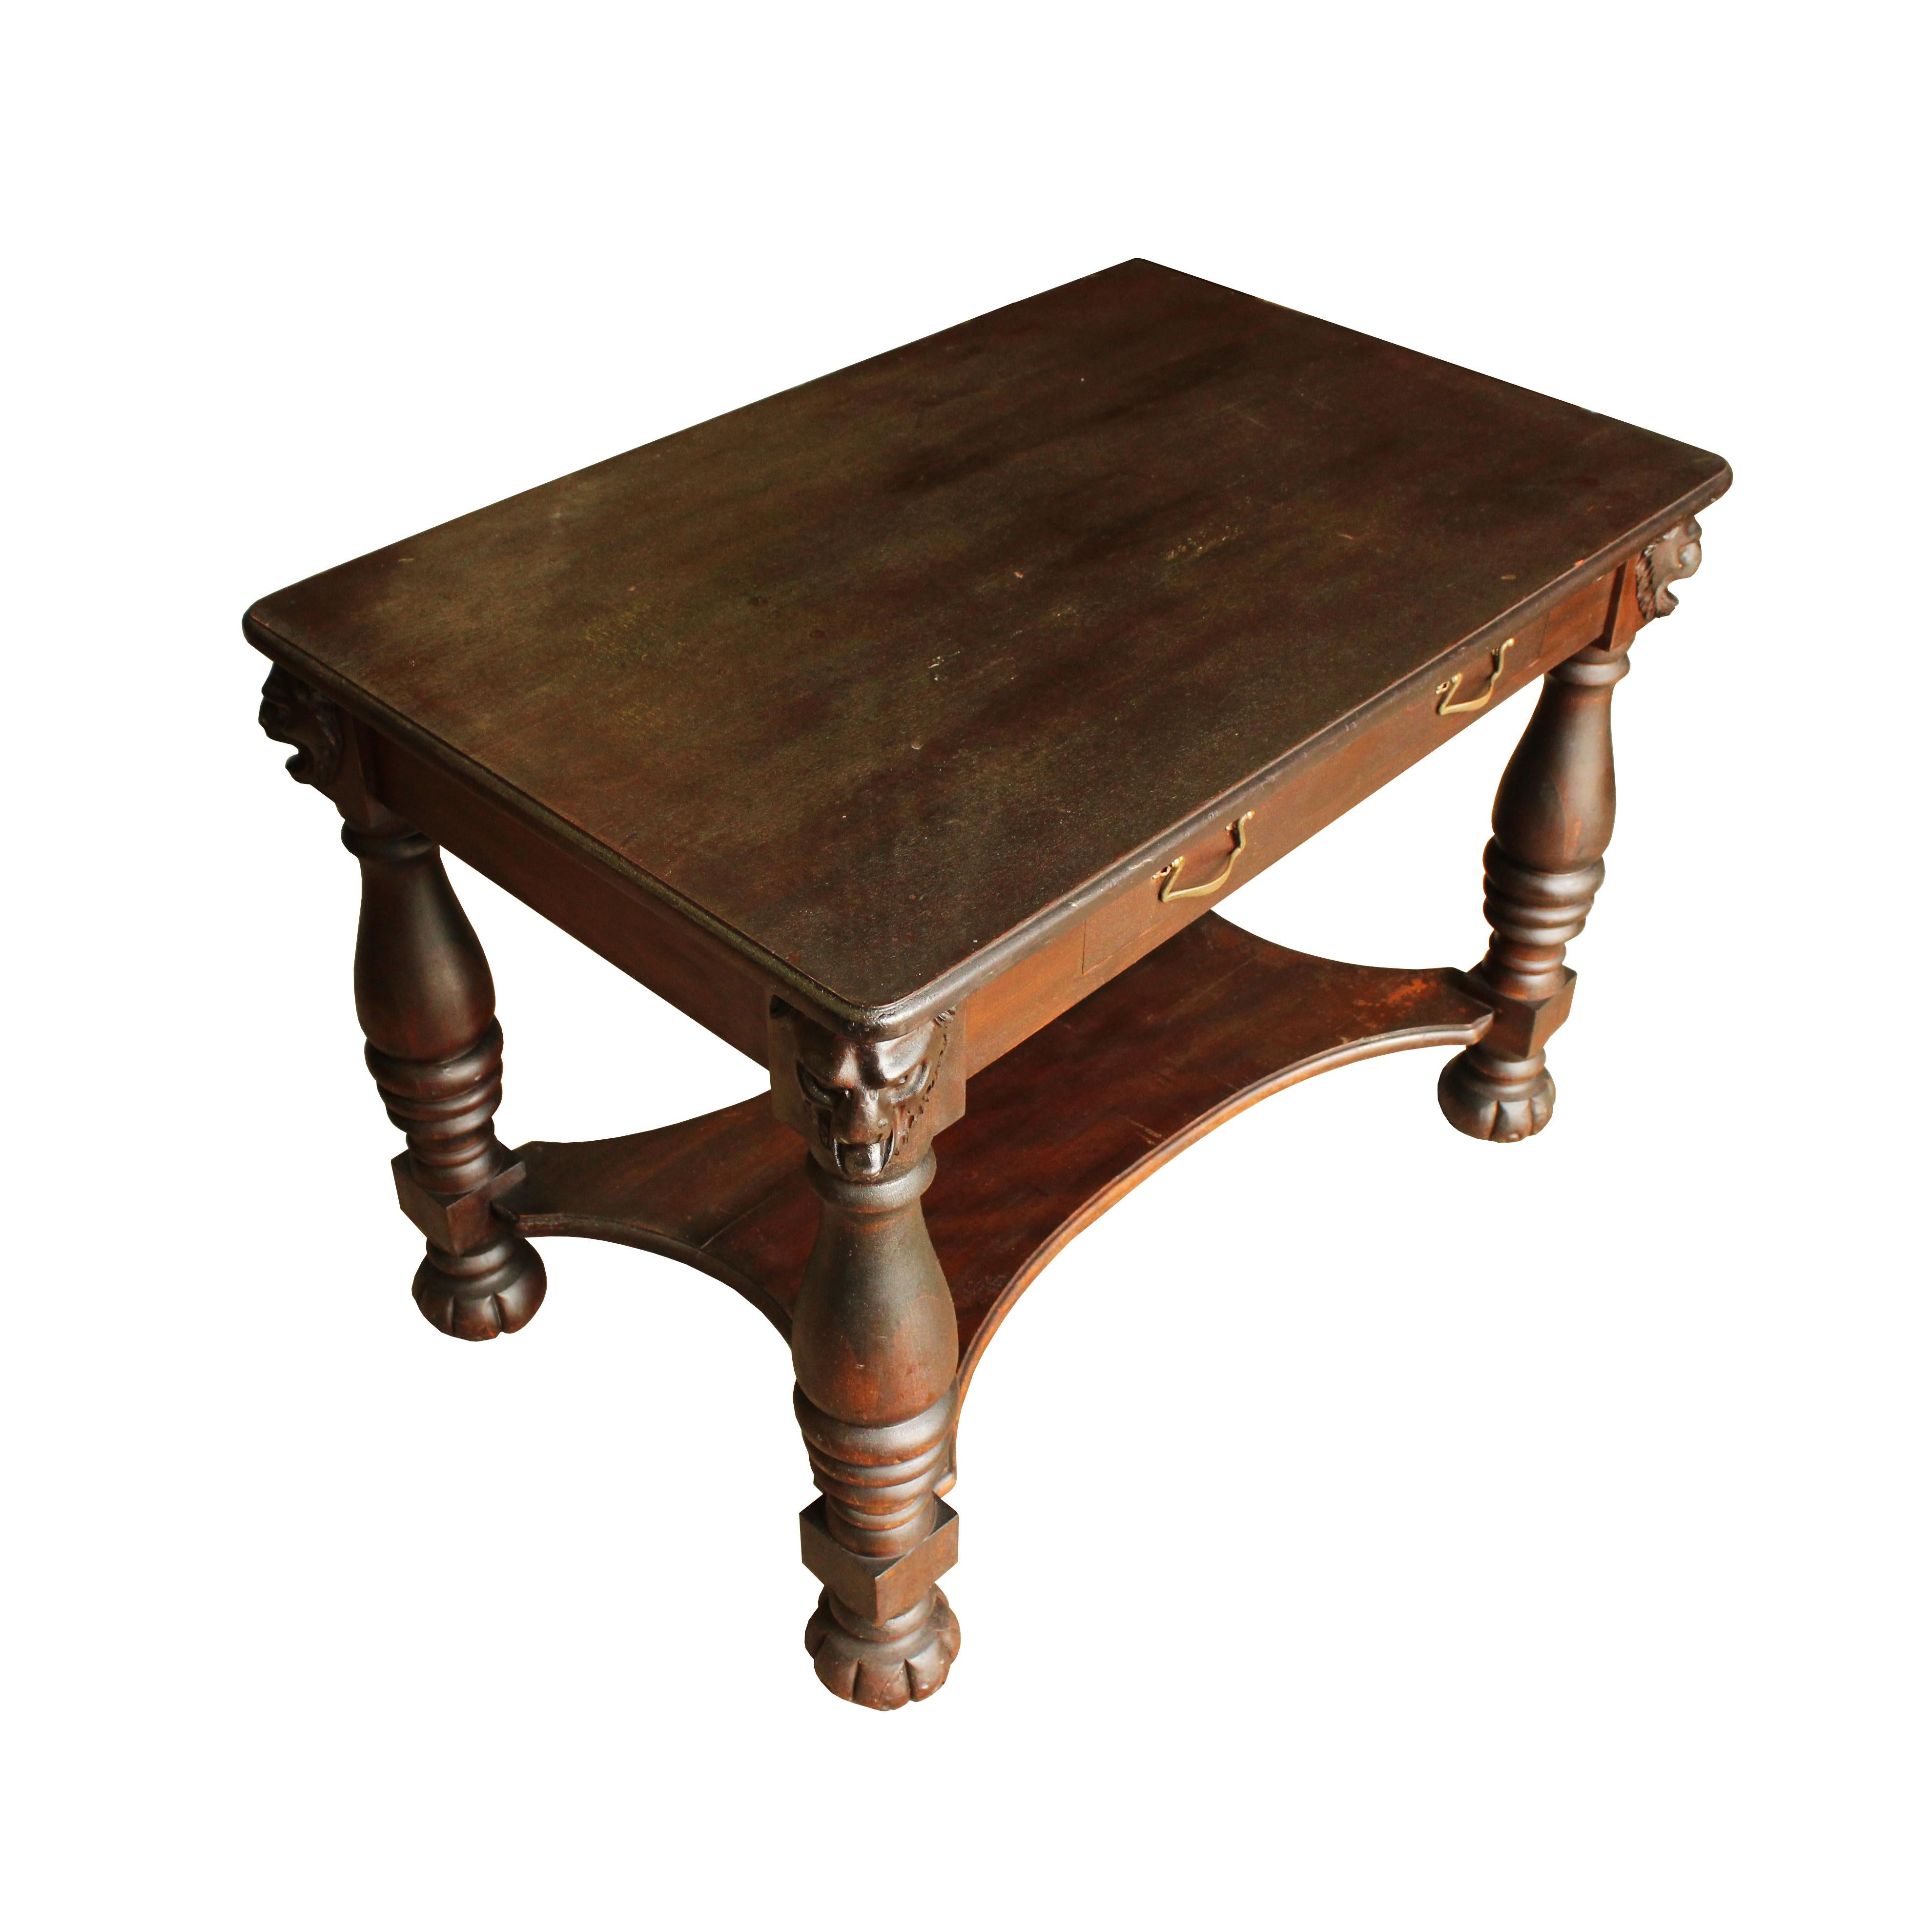 Stately enough for the library of a steel baron, this writing desk is handsome and functional. The head of a lion, mouth agape in mid-roar, adorns each leg and a single central drawer with brass bale pulls provides a place to tuck your nibs and ink.